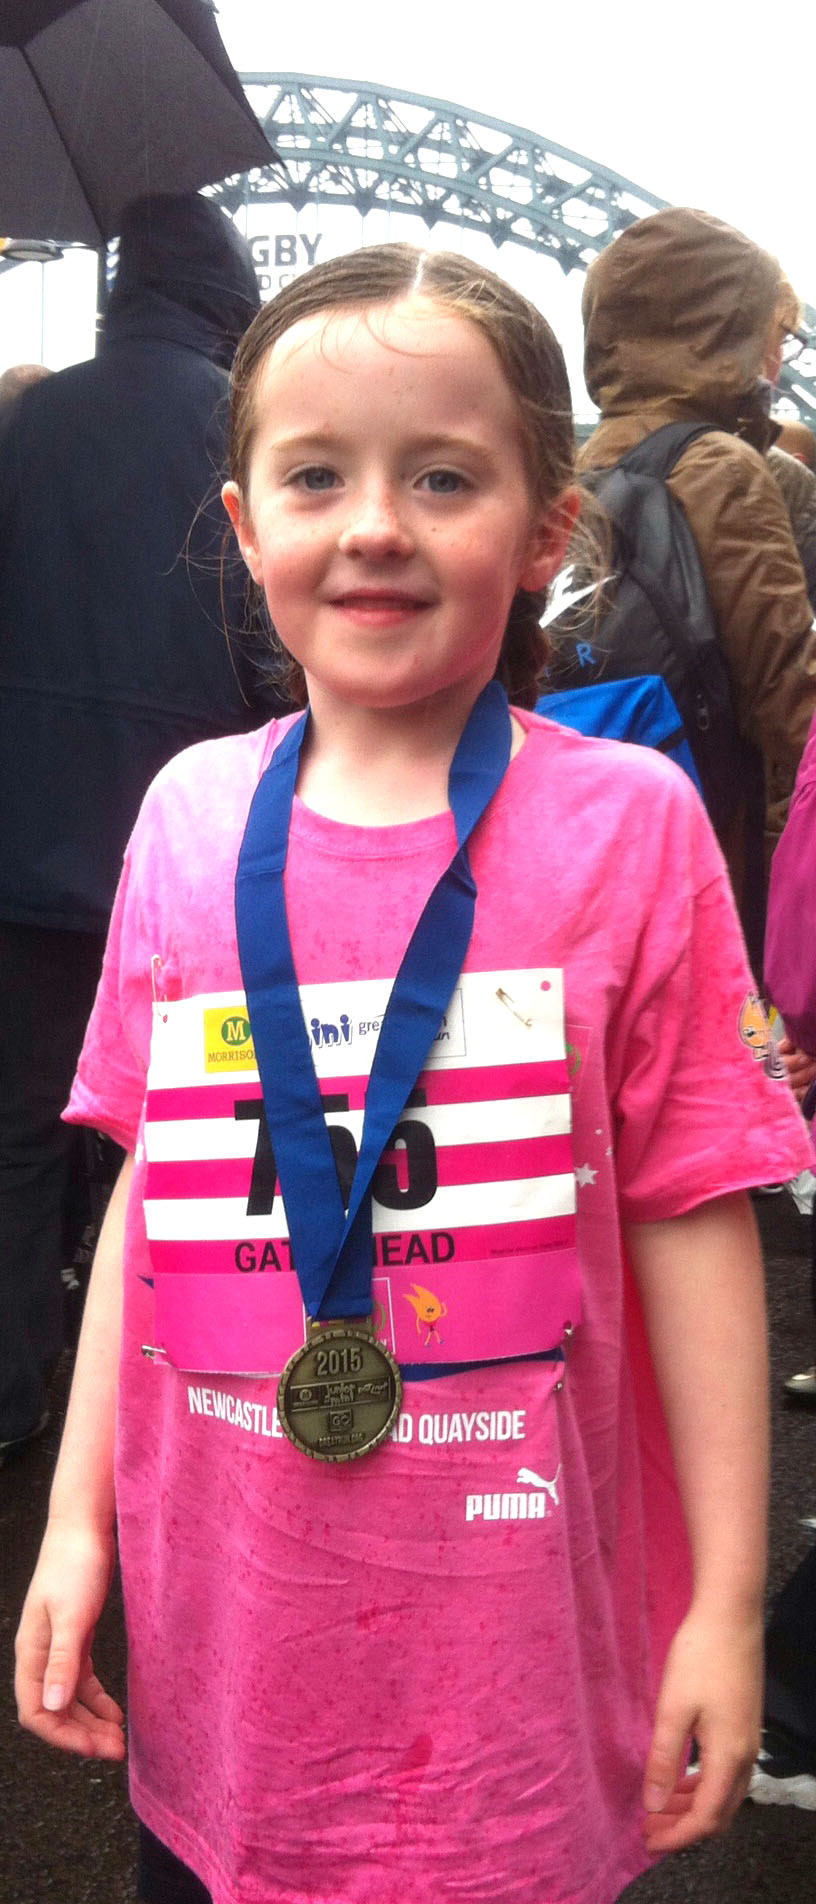 6 year old Aycliffe Girl Completes Mini Great North Run